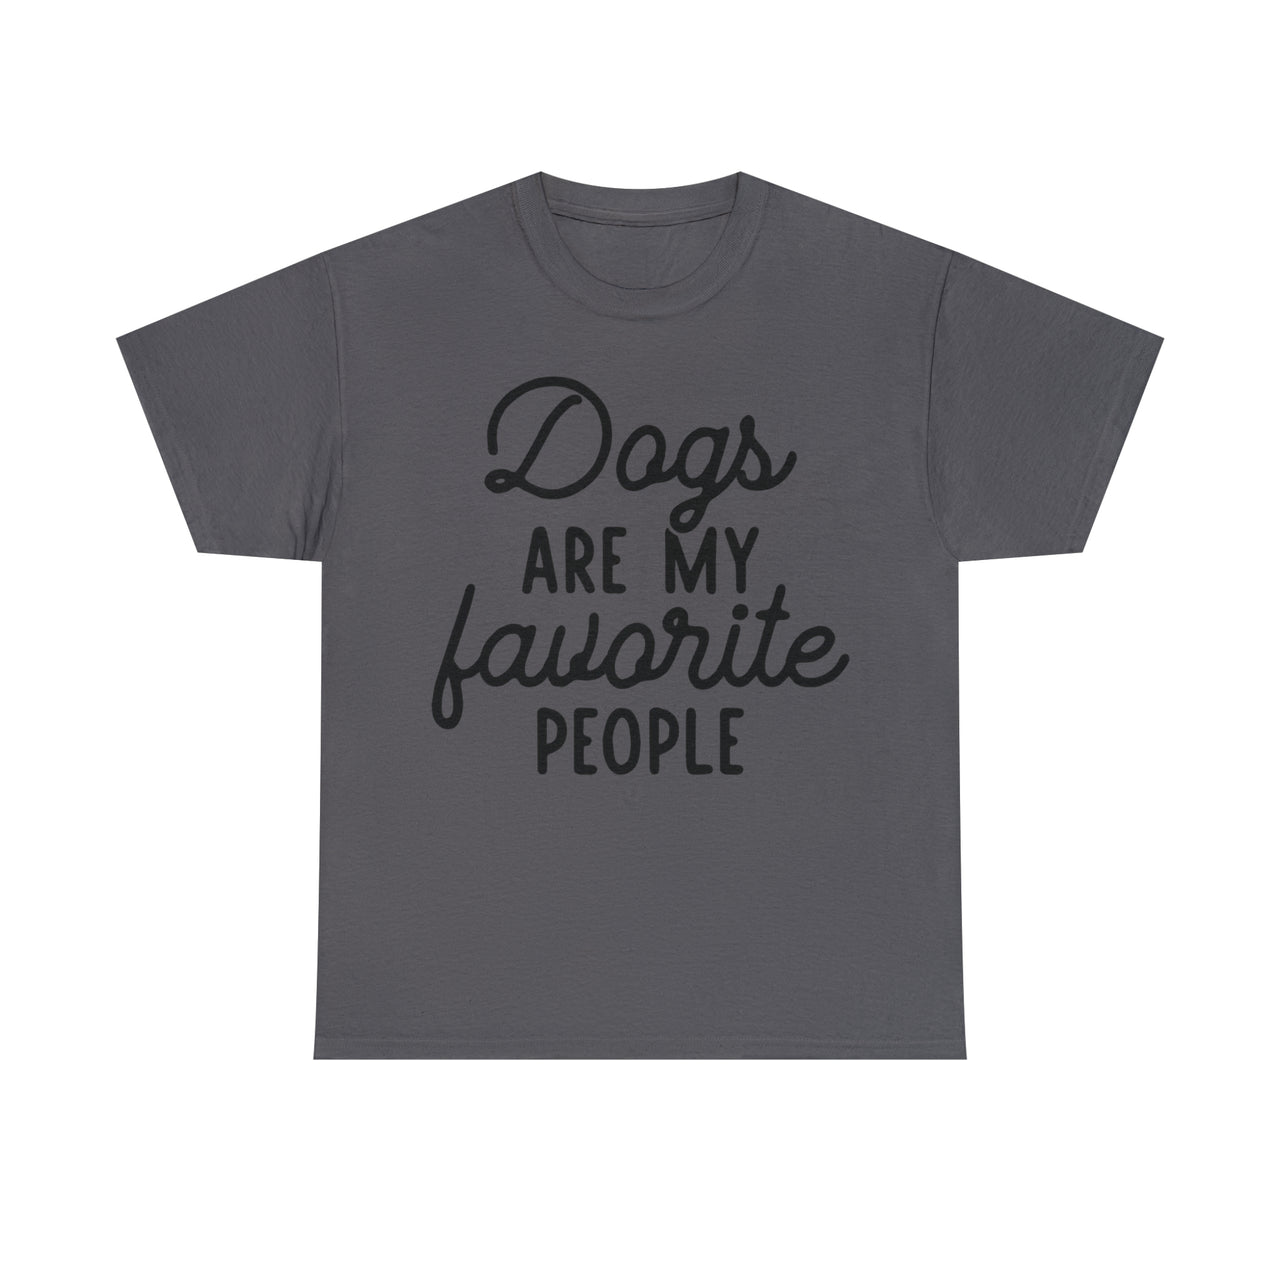 Dogs Are My Favorite People 🐶 Unisex T-Shirt